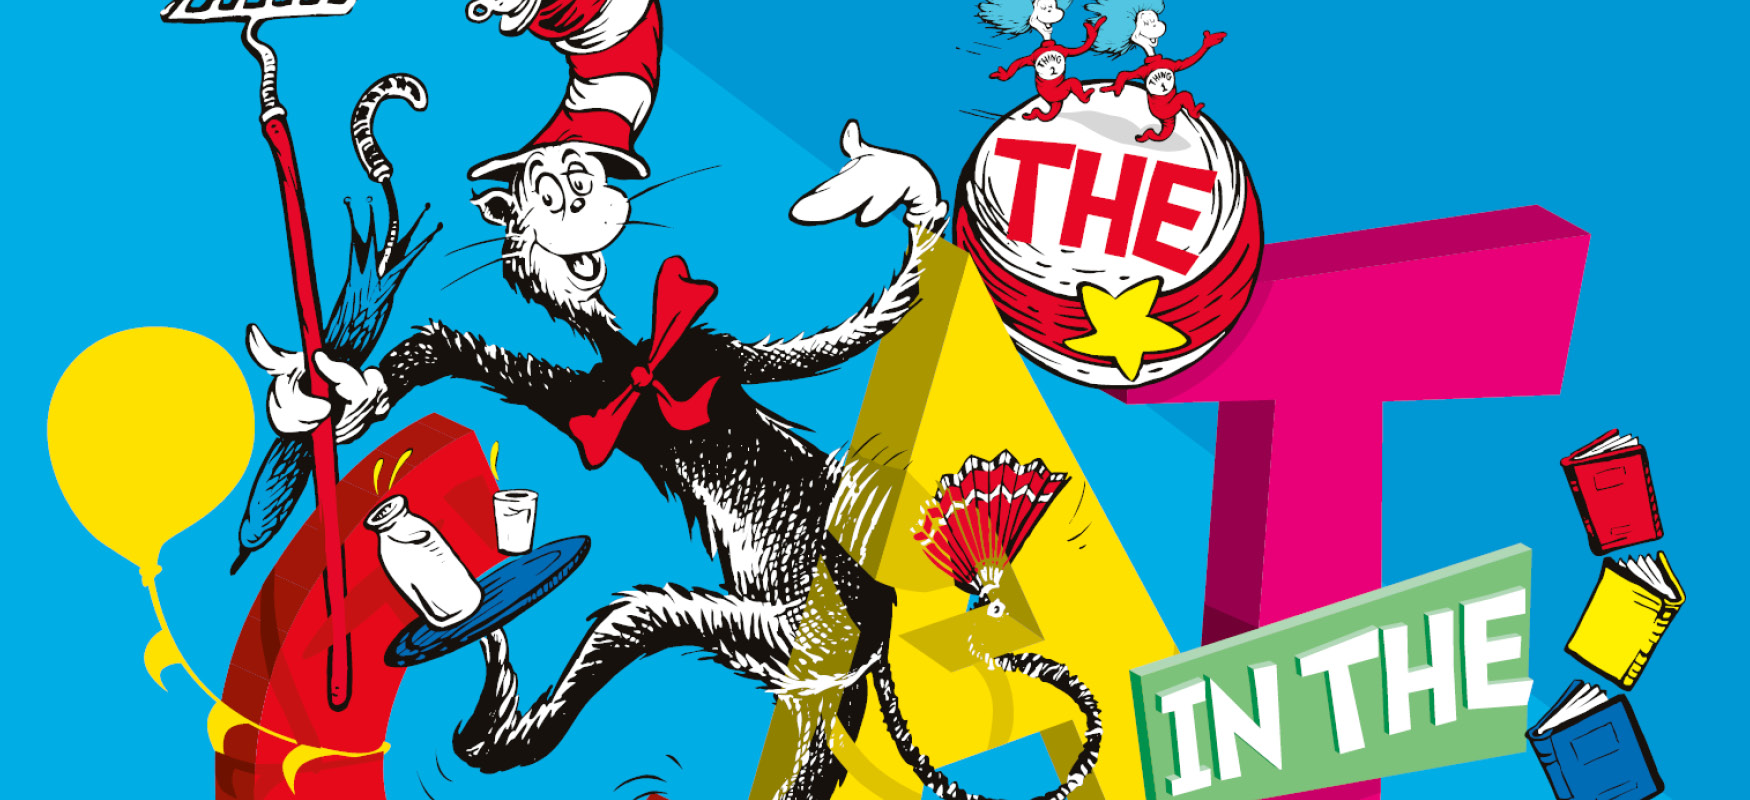 CAT IN THE HAT, YVONNE ARNAUD THEATRE, GUILDFORD, SURREY, FAMILY, WHATS ON